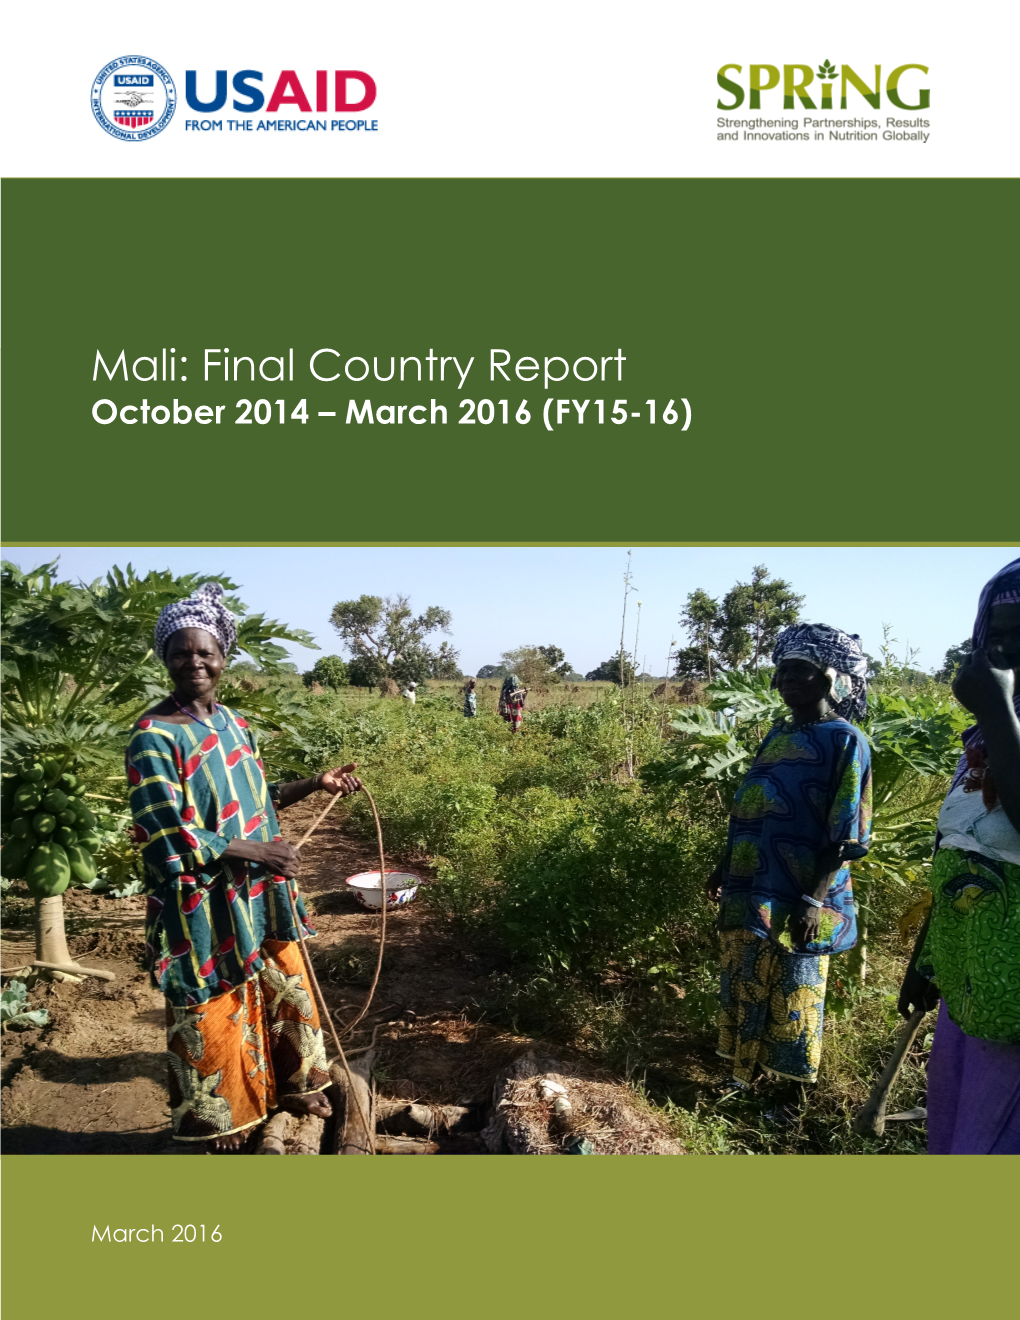 Mali: Final Country Report; October 2014